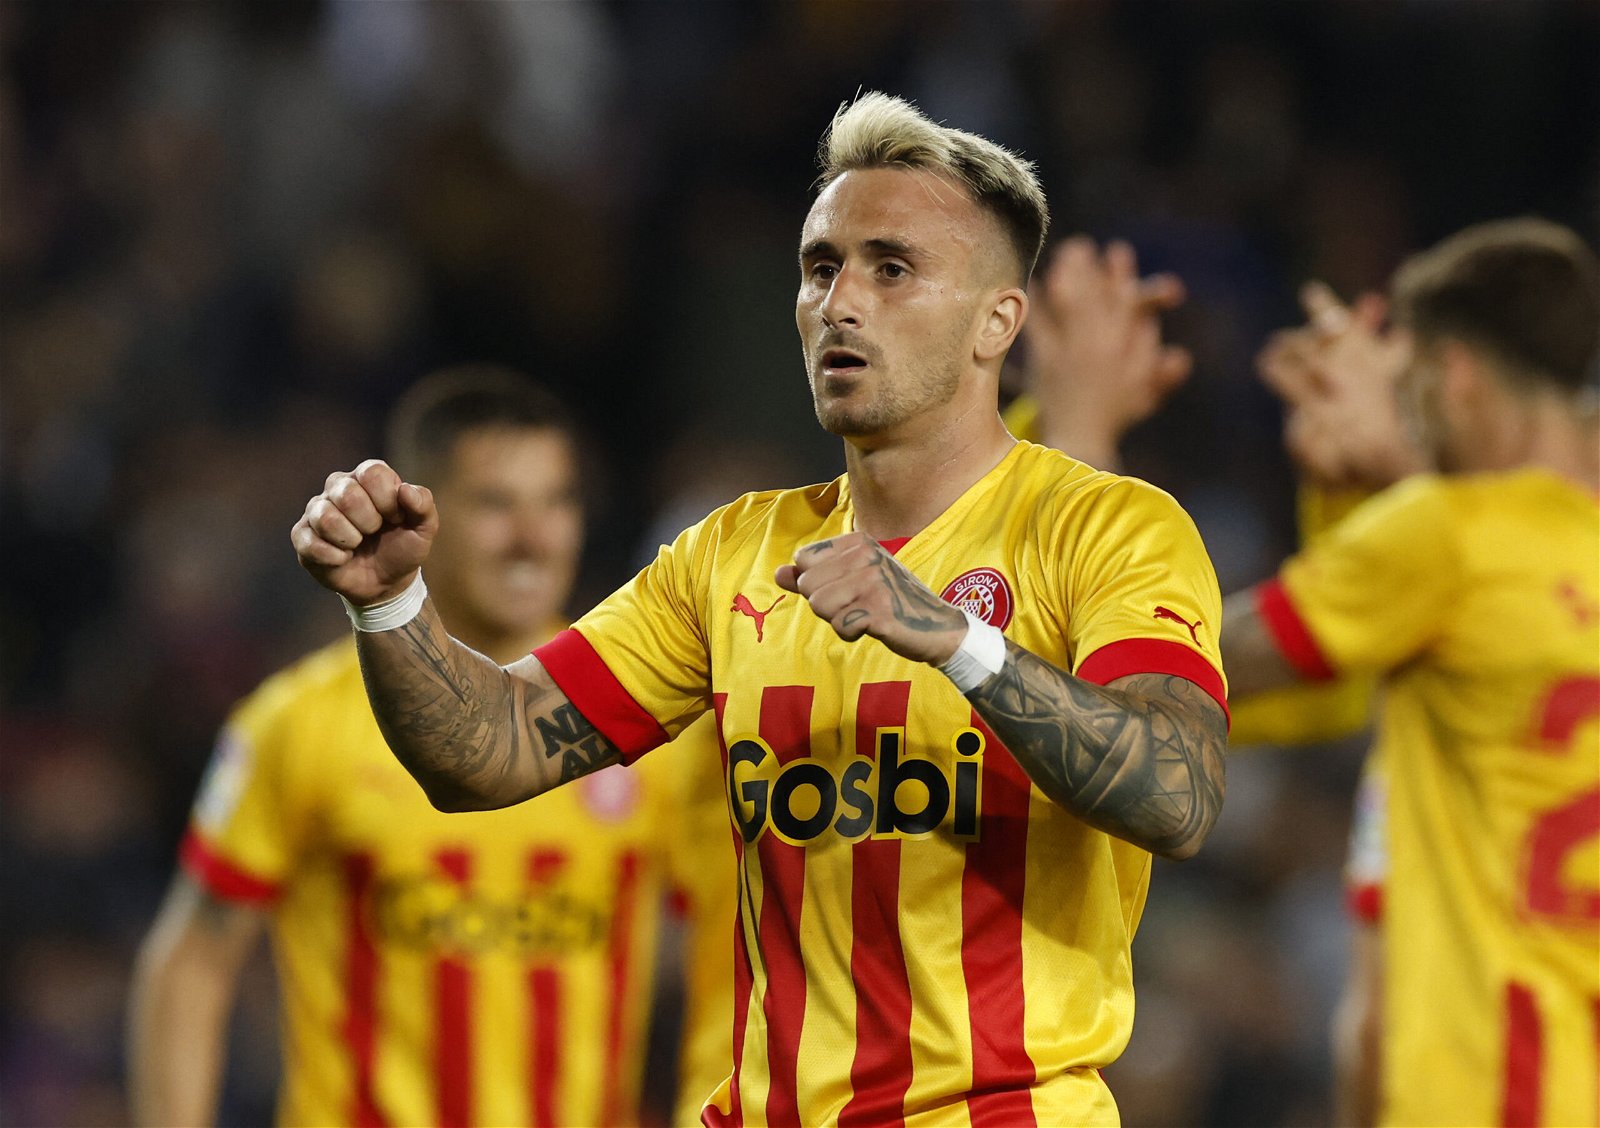 Barcelona hope they can sign Aleix Garcia from Girona for €12m - Barca  Blaugranes